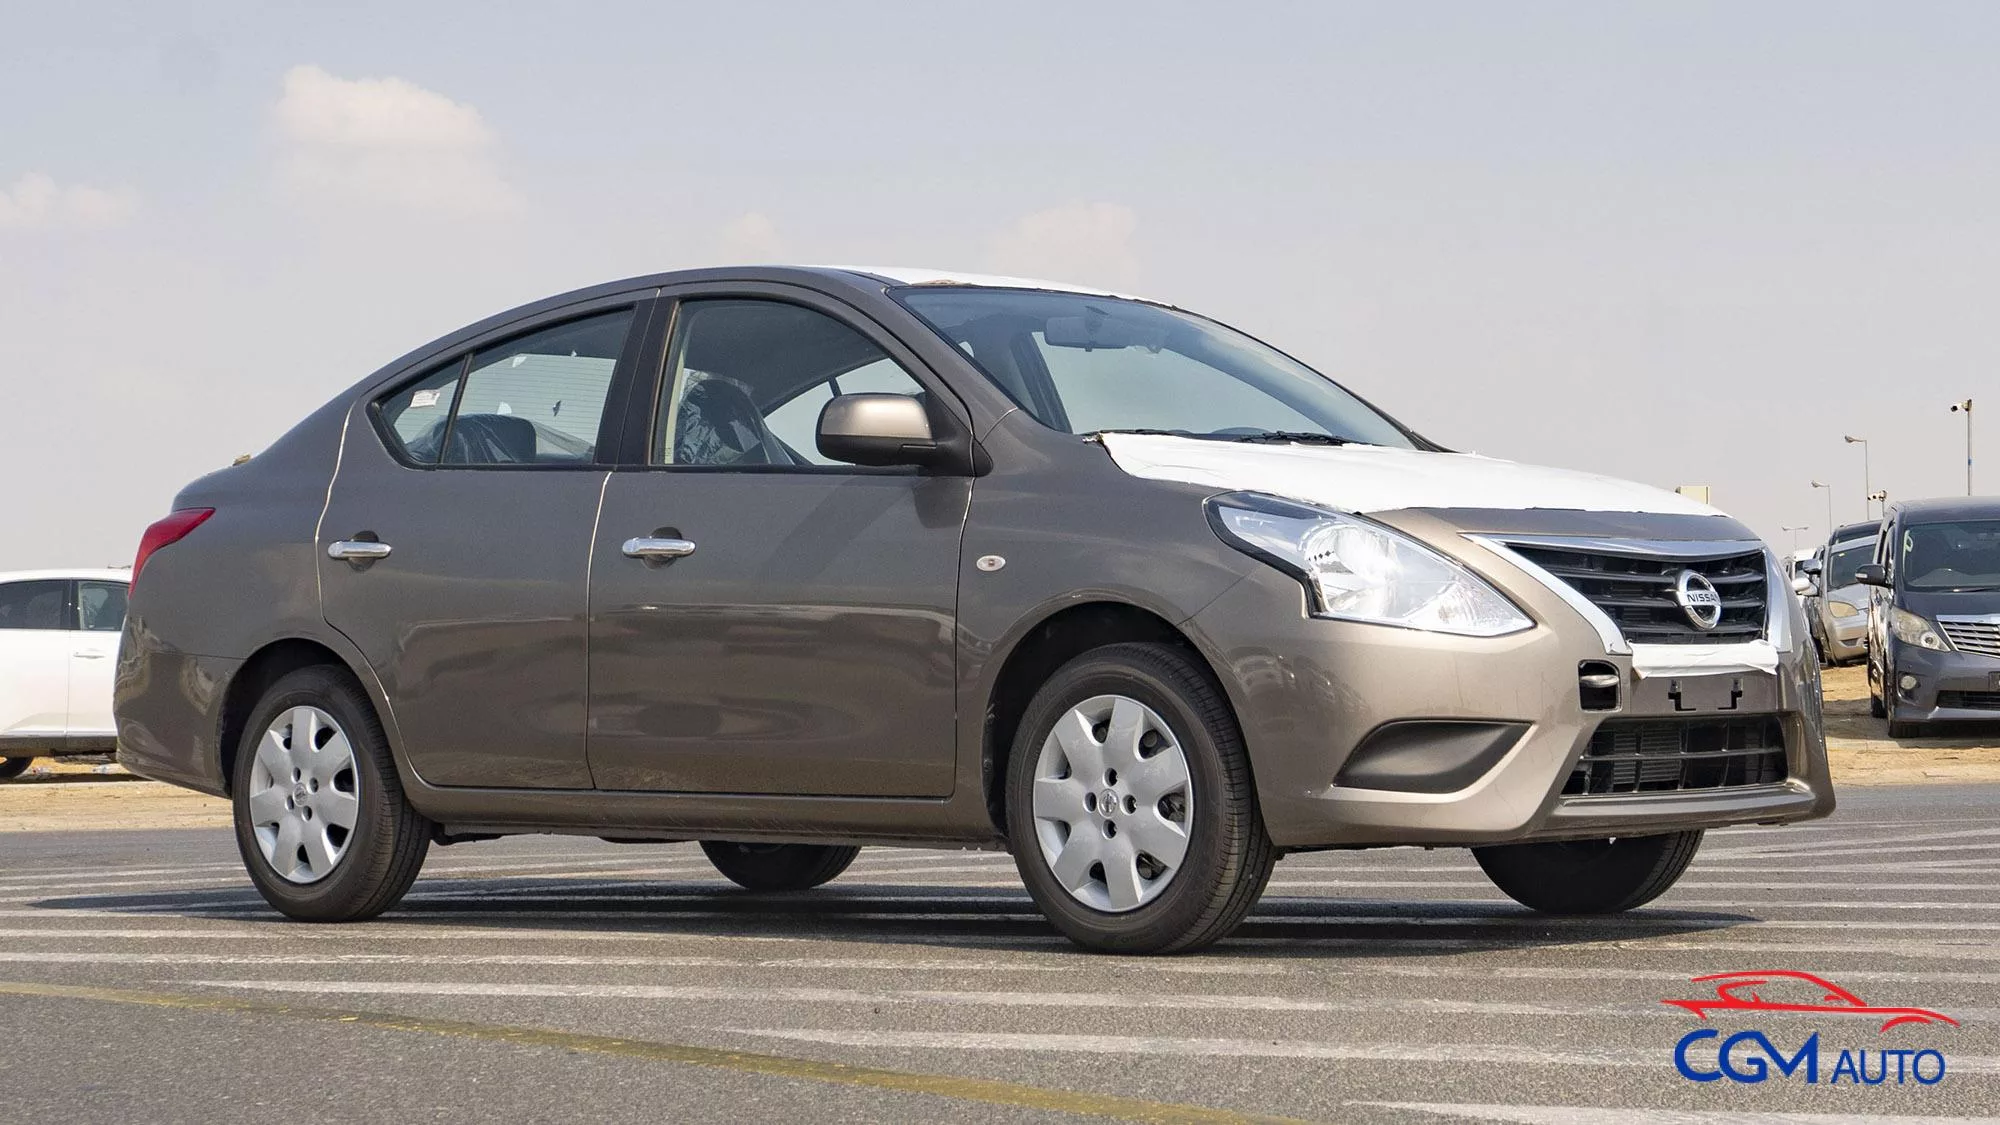 2023 Nissan Sunny New Car for sale in the UAE, Dubai, Sharjah and Abu Dhabi | Special Offers